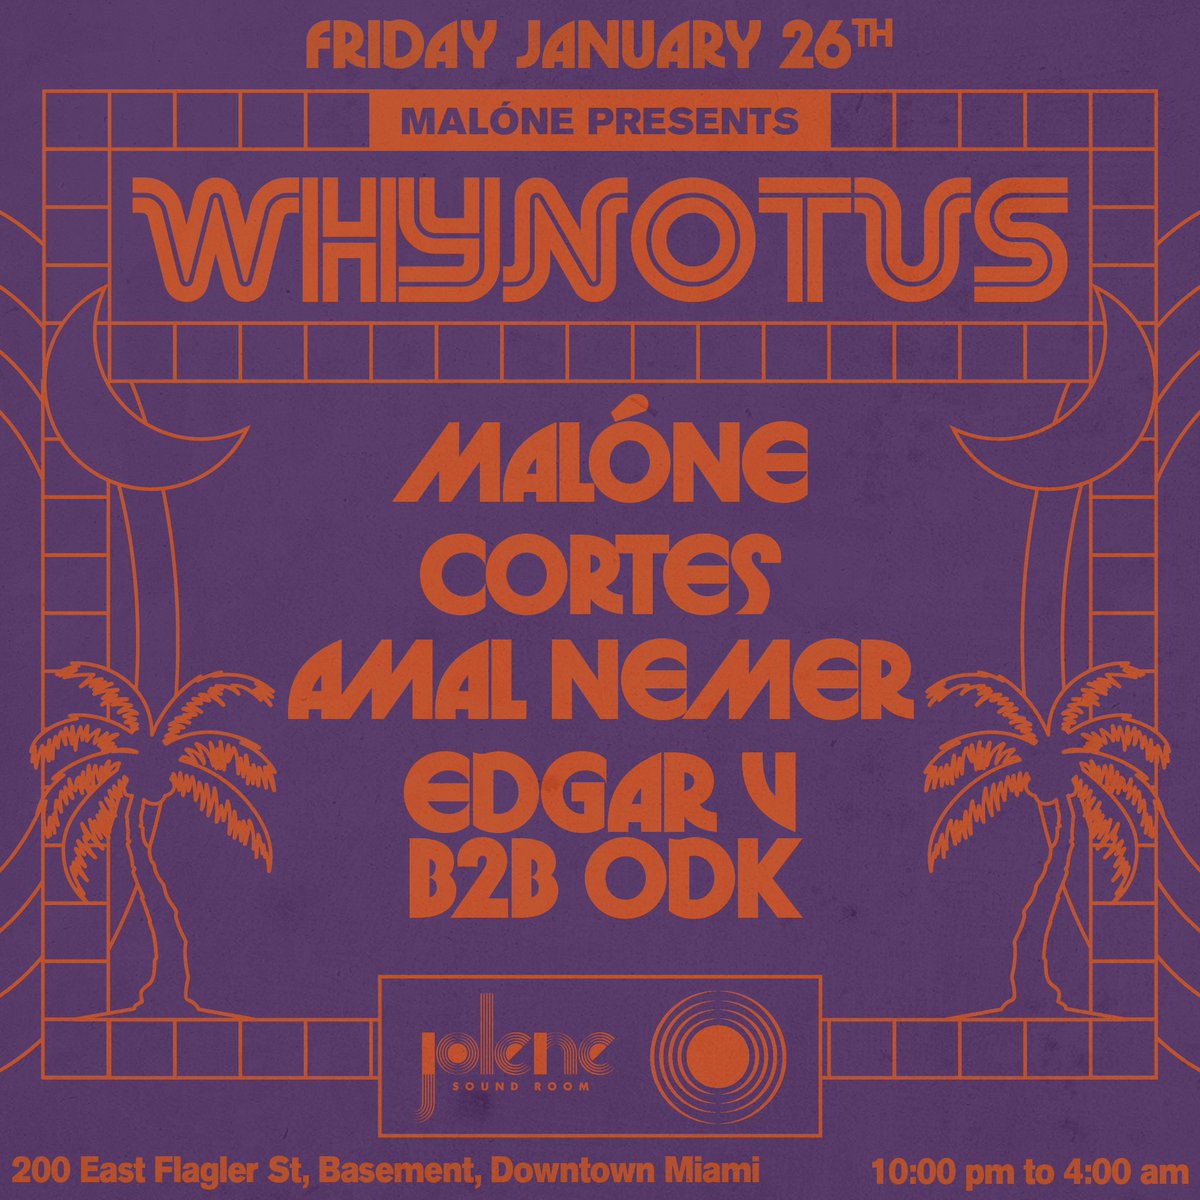 Sunday morning workout ✅ to get the vibes going early for a big upcoming week… 🫡 MIAMI! Join me Friday 1/26 at the new beautiful @jolenesoundroom for the launch of my new label @whynotusofc @ColomaColoma @DavidSinopoli @iampaulcampbell 🎟️🎟️🎟️ link.dice.fm/whynotus